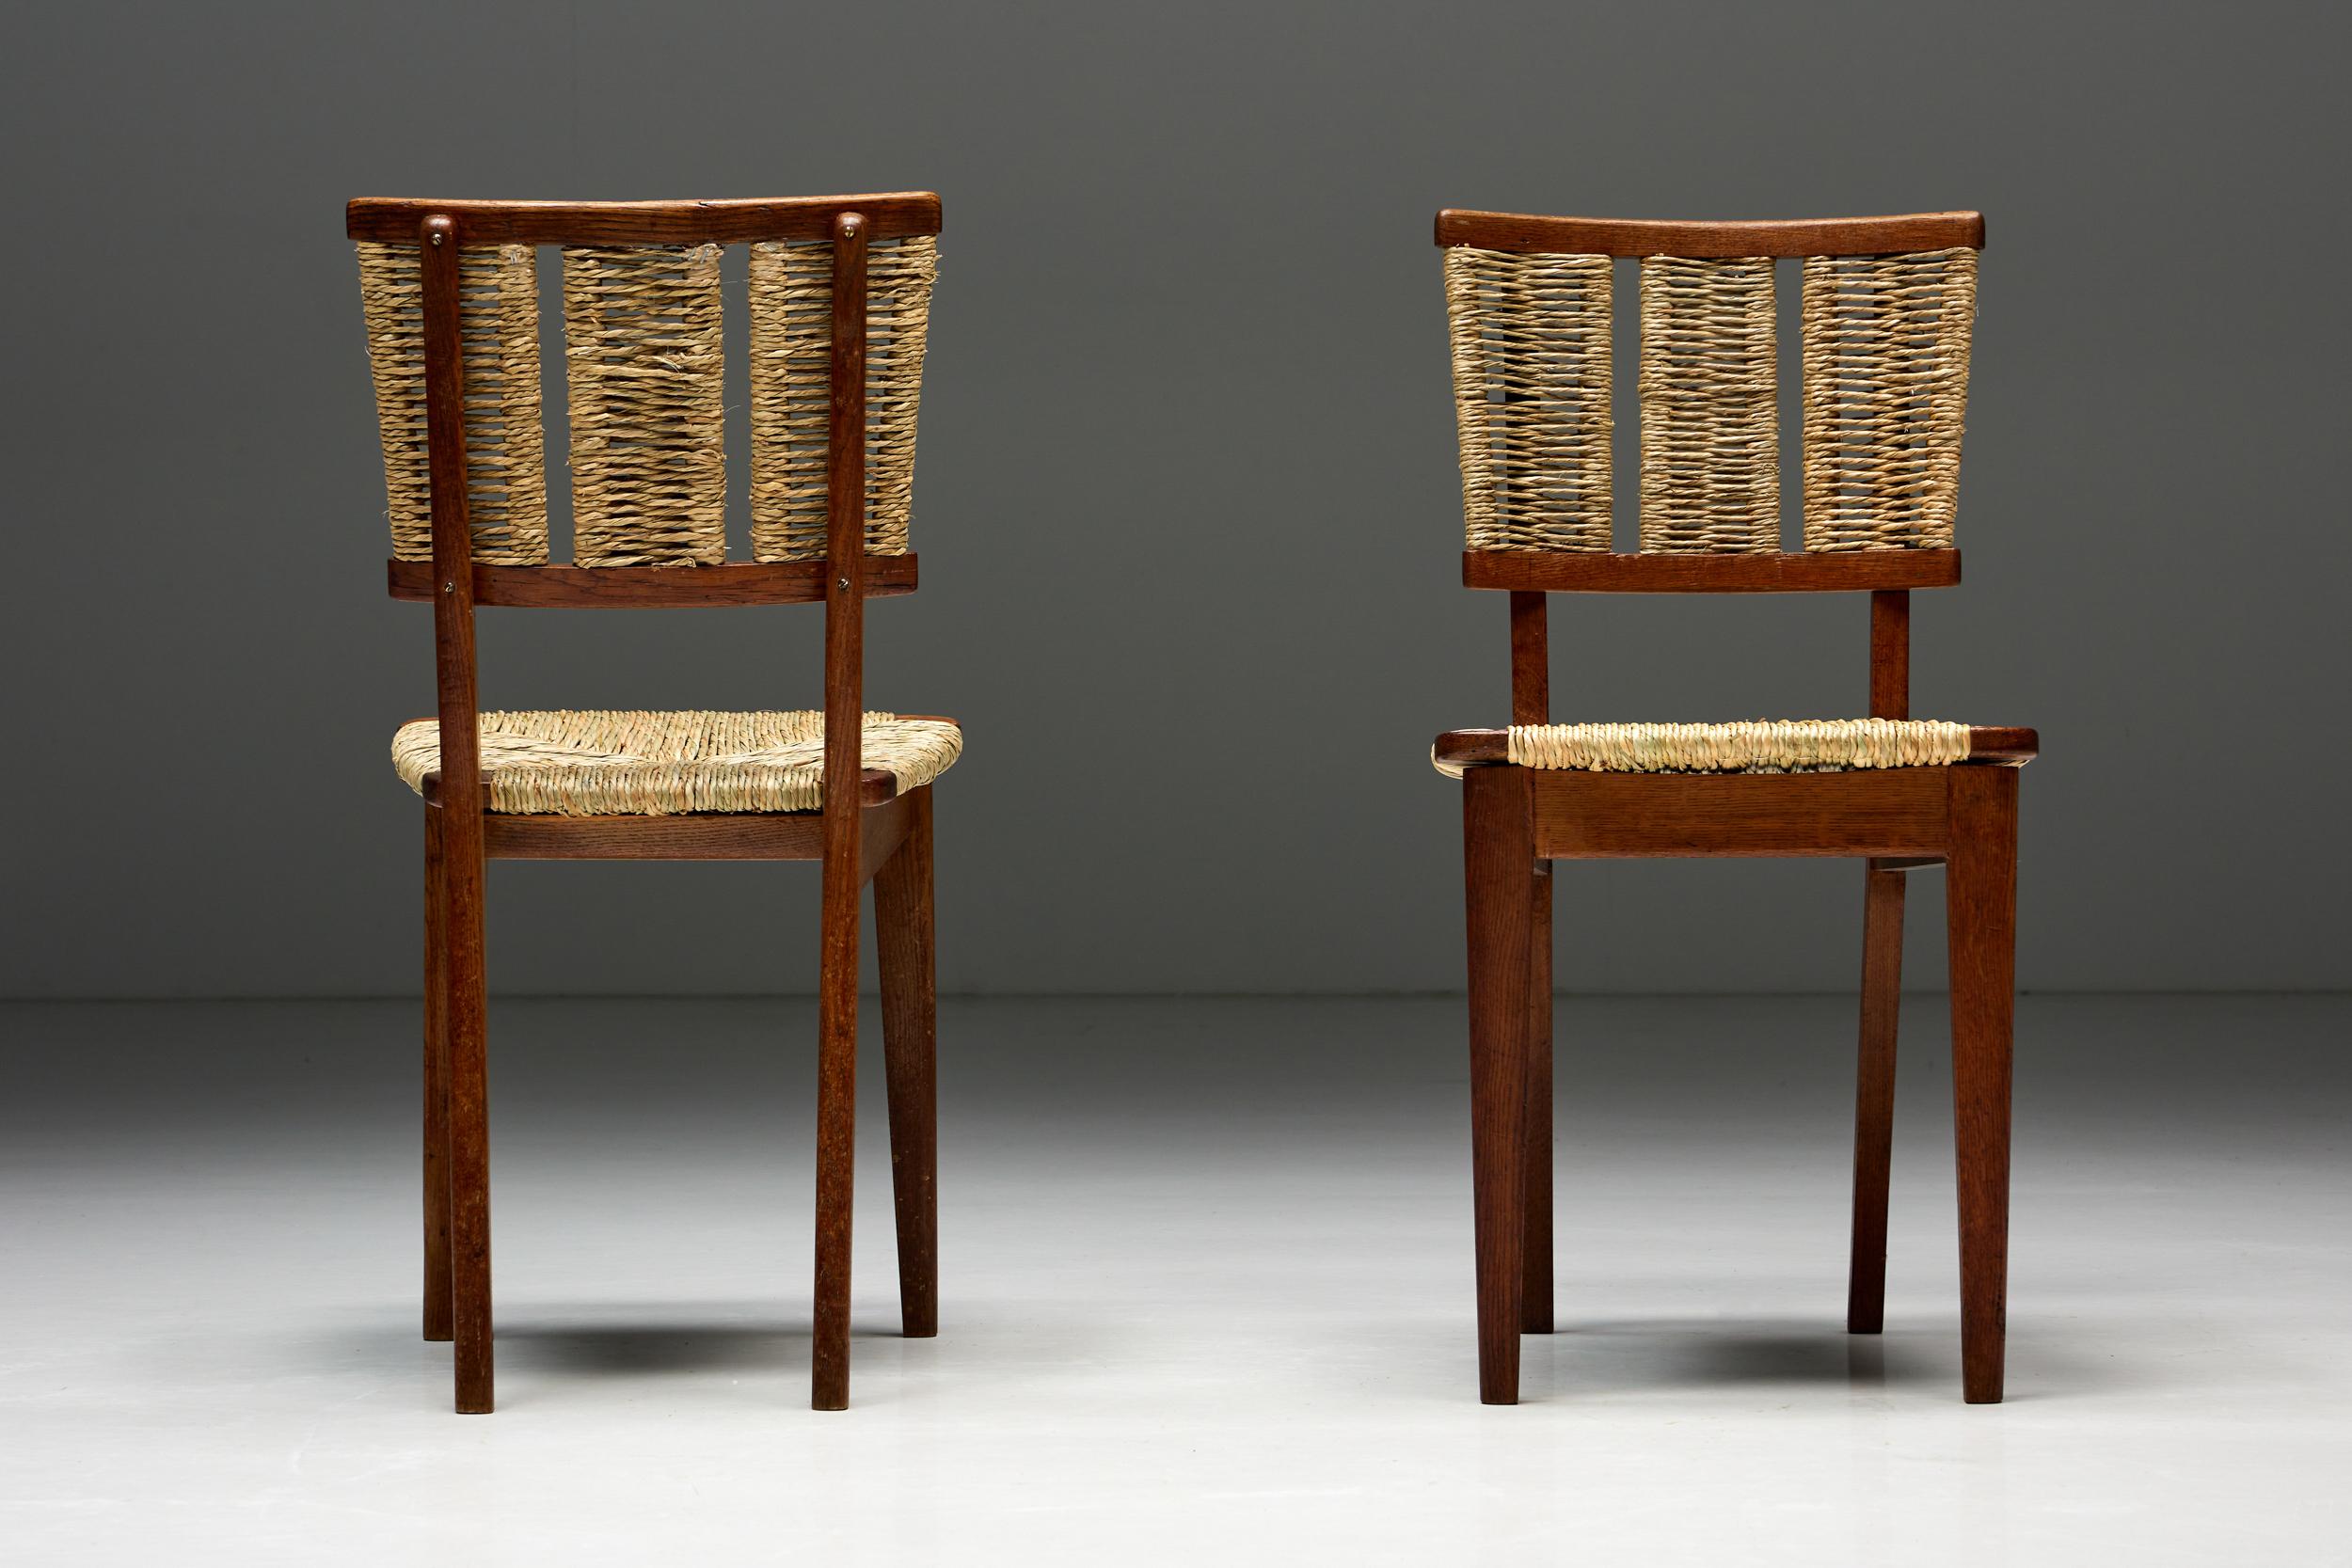 Dining chairs model 'A2-1' by Dutch designer Mart Stam. This timeless piece of modernist design is a true representation of Mart Stam's Minimalist and functional design philosophy. Made from high-quality oak and featuring a woven wicker seagrass